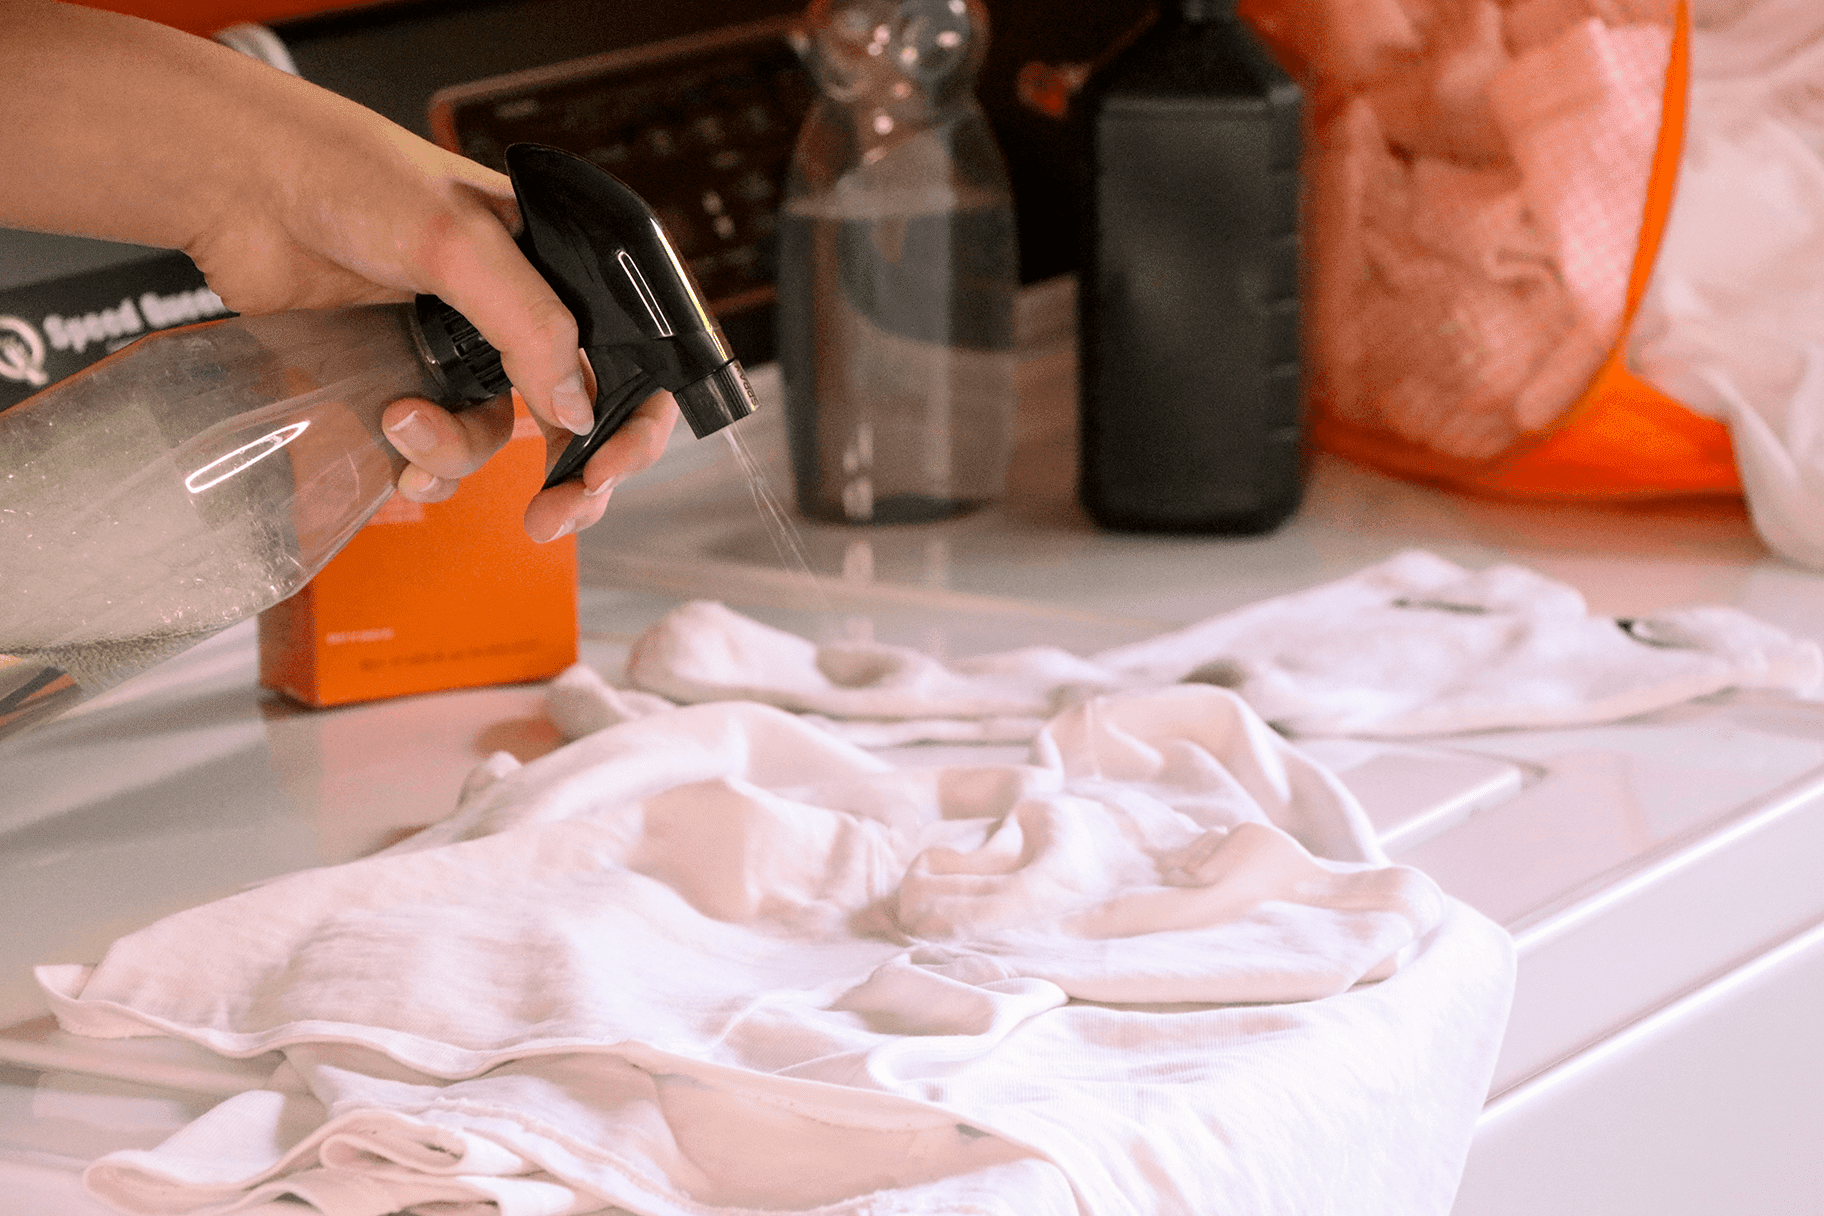 How To Get Stains Out of White Shirts